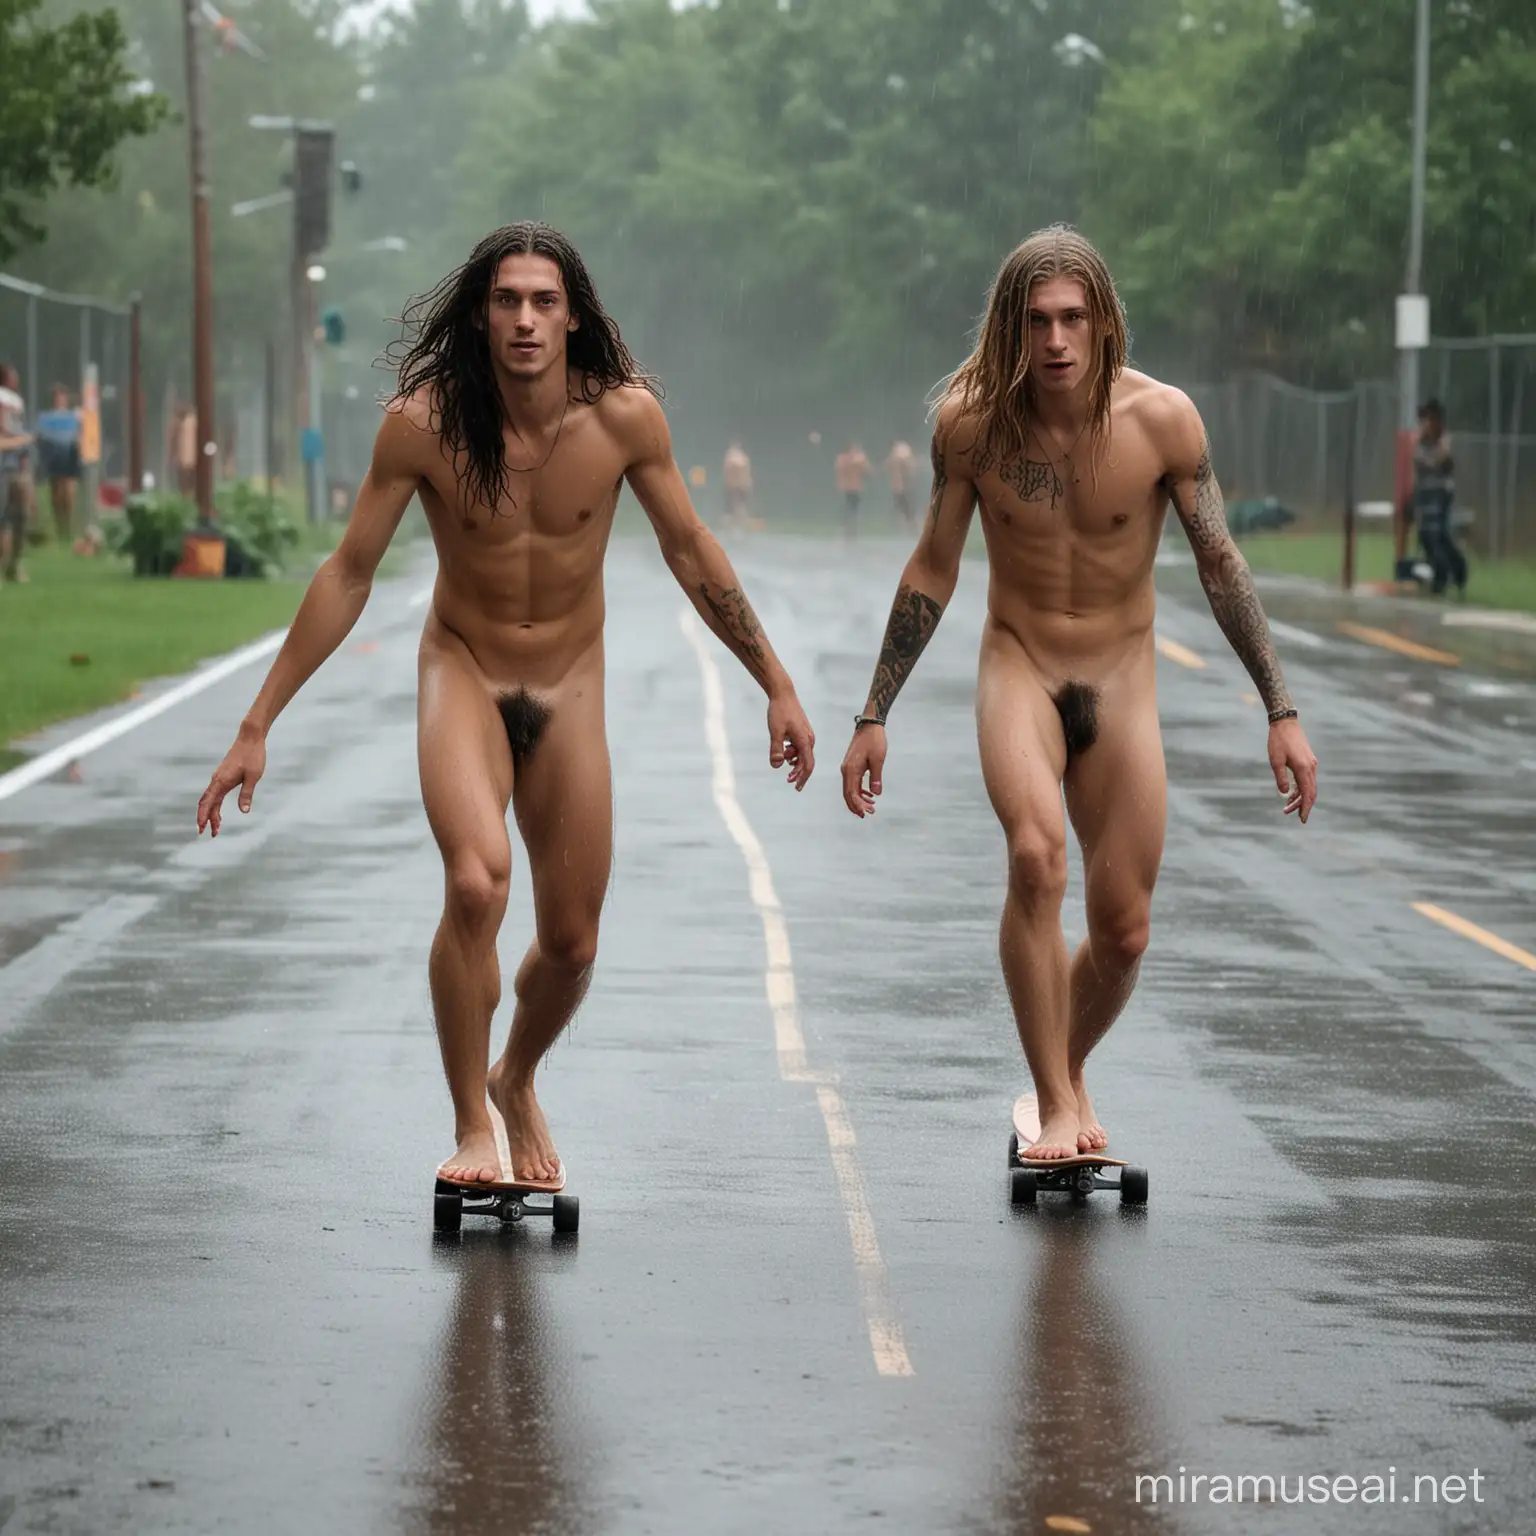 Naked Tattooed Skateboarders in Action on Rainy Skate Track